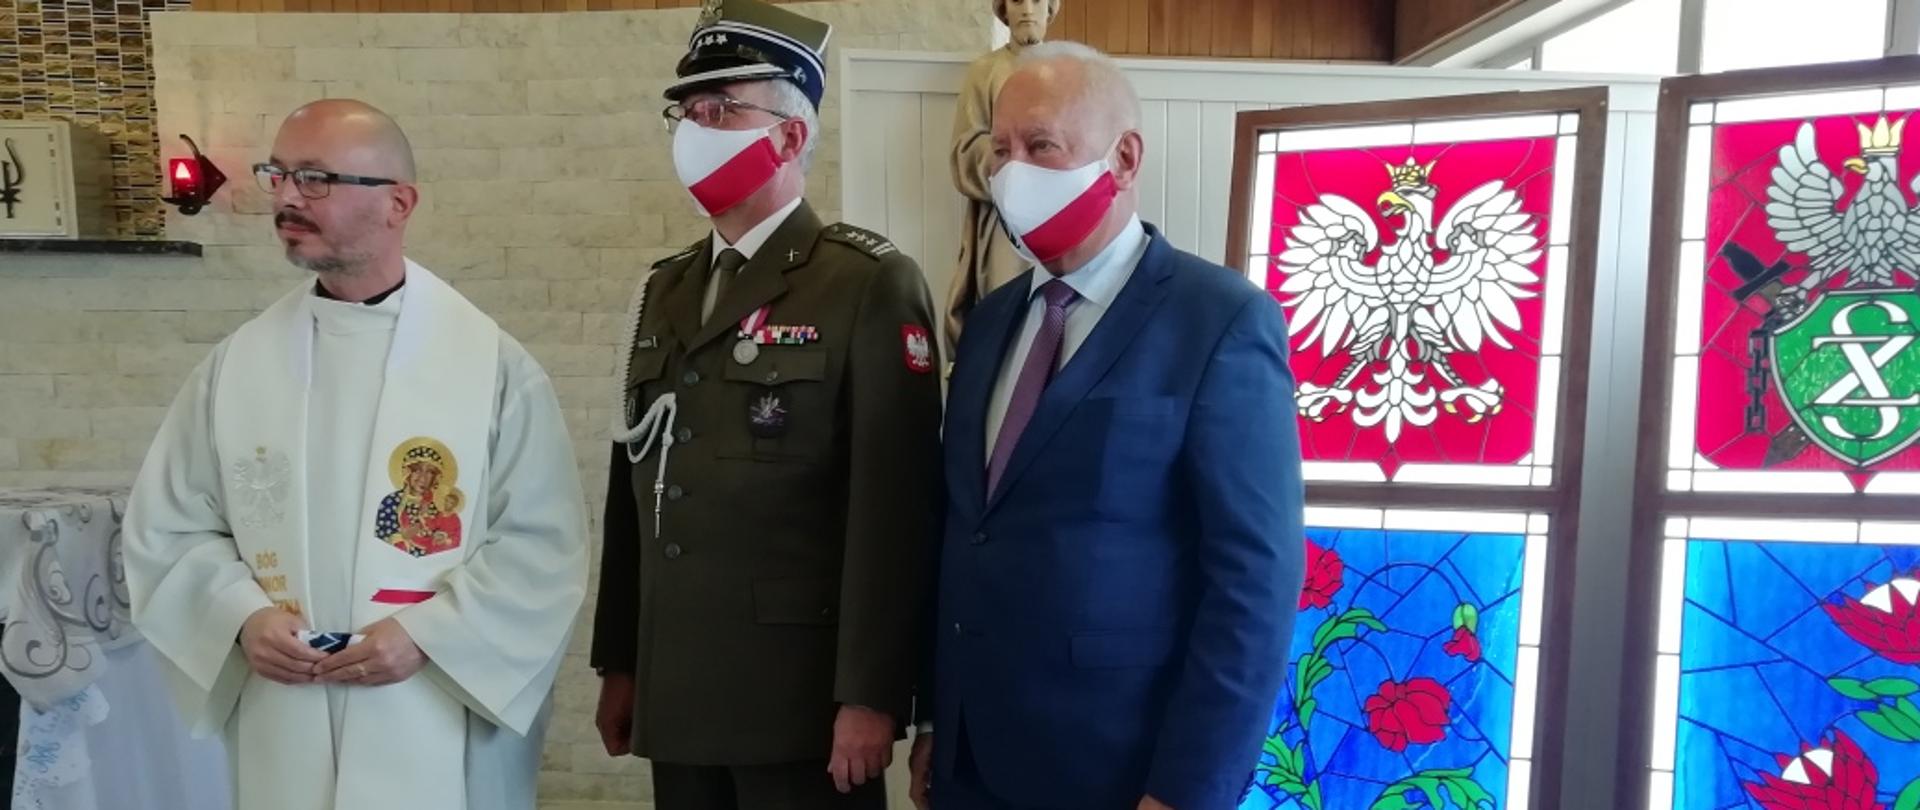 Commemoration of the 76th anniversary of " Warsaw Flights". From the right side: Ambassador of the Republic of Poland Andrzeh Kanthak, col. Dariusz Siekiera and father Radosław Szymoniak at St. Joseph the Worker, Polish Church in Norwood, Johannesburg